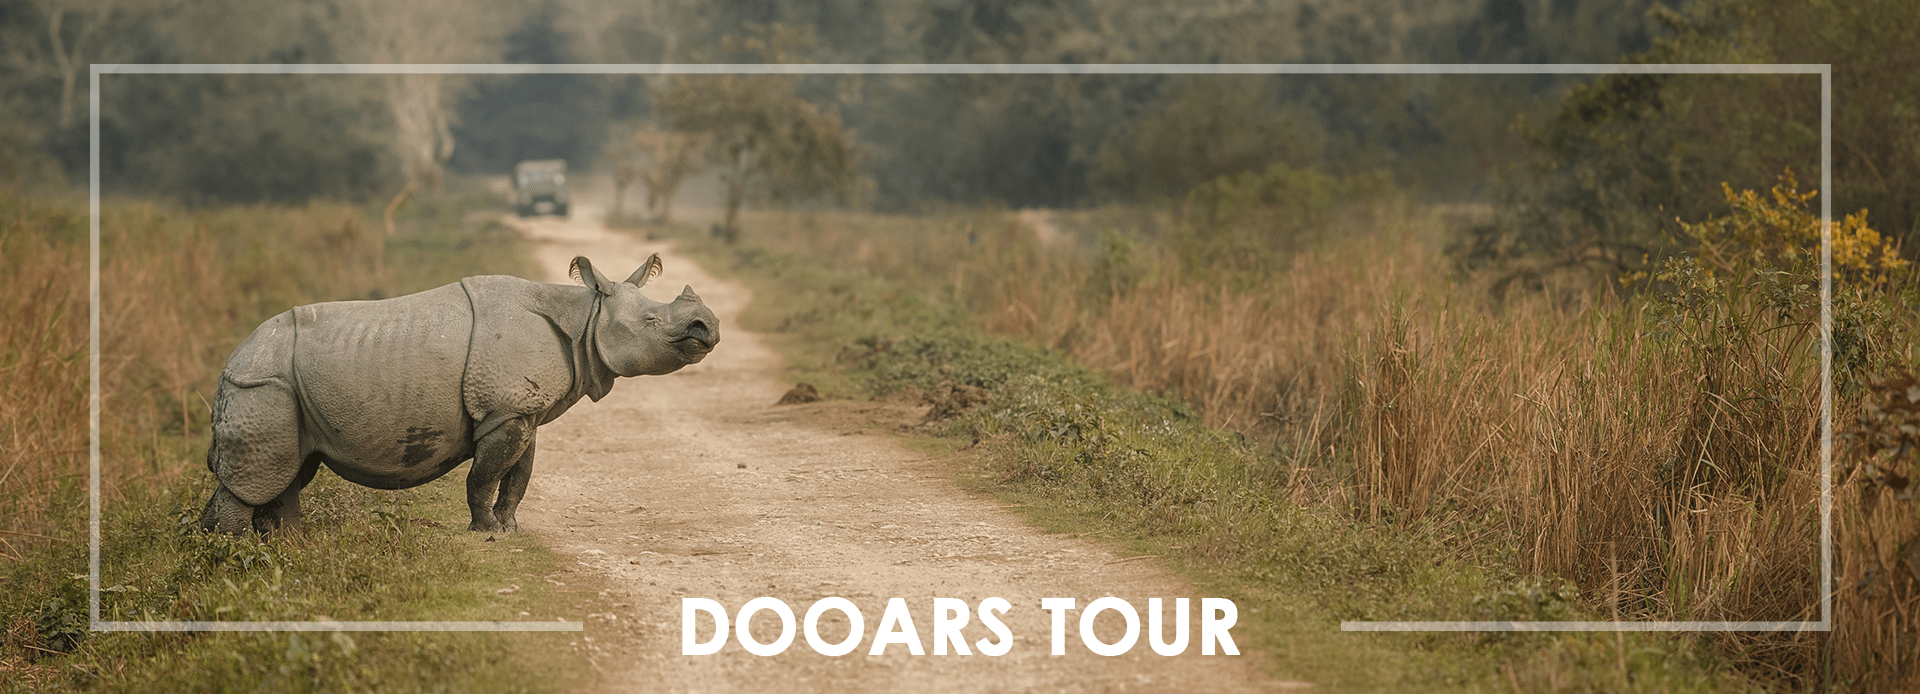 Dooars Tour Packages